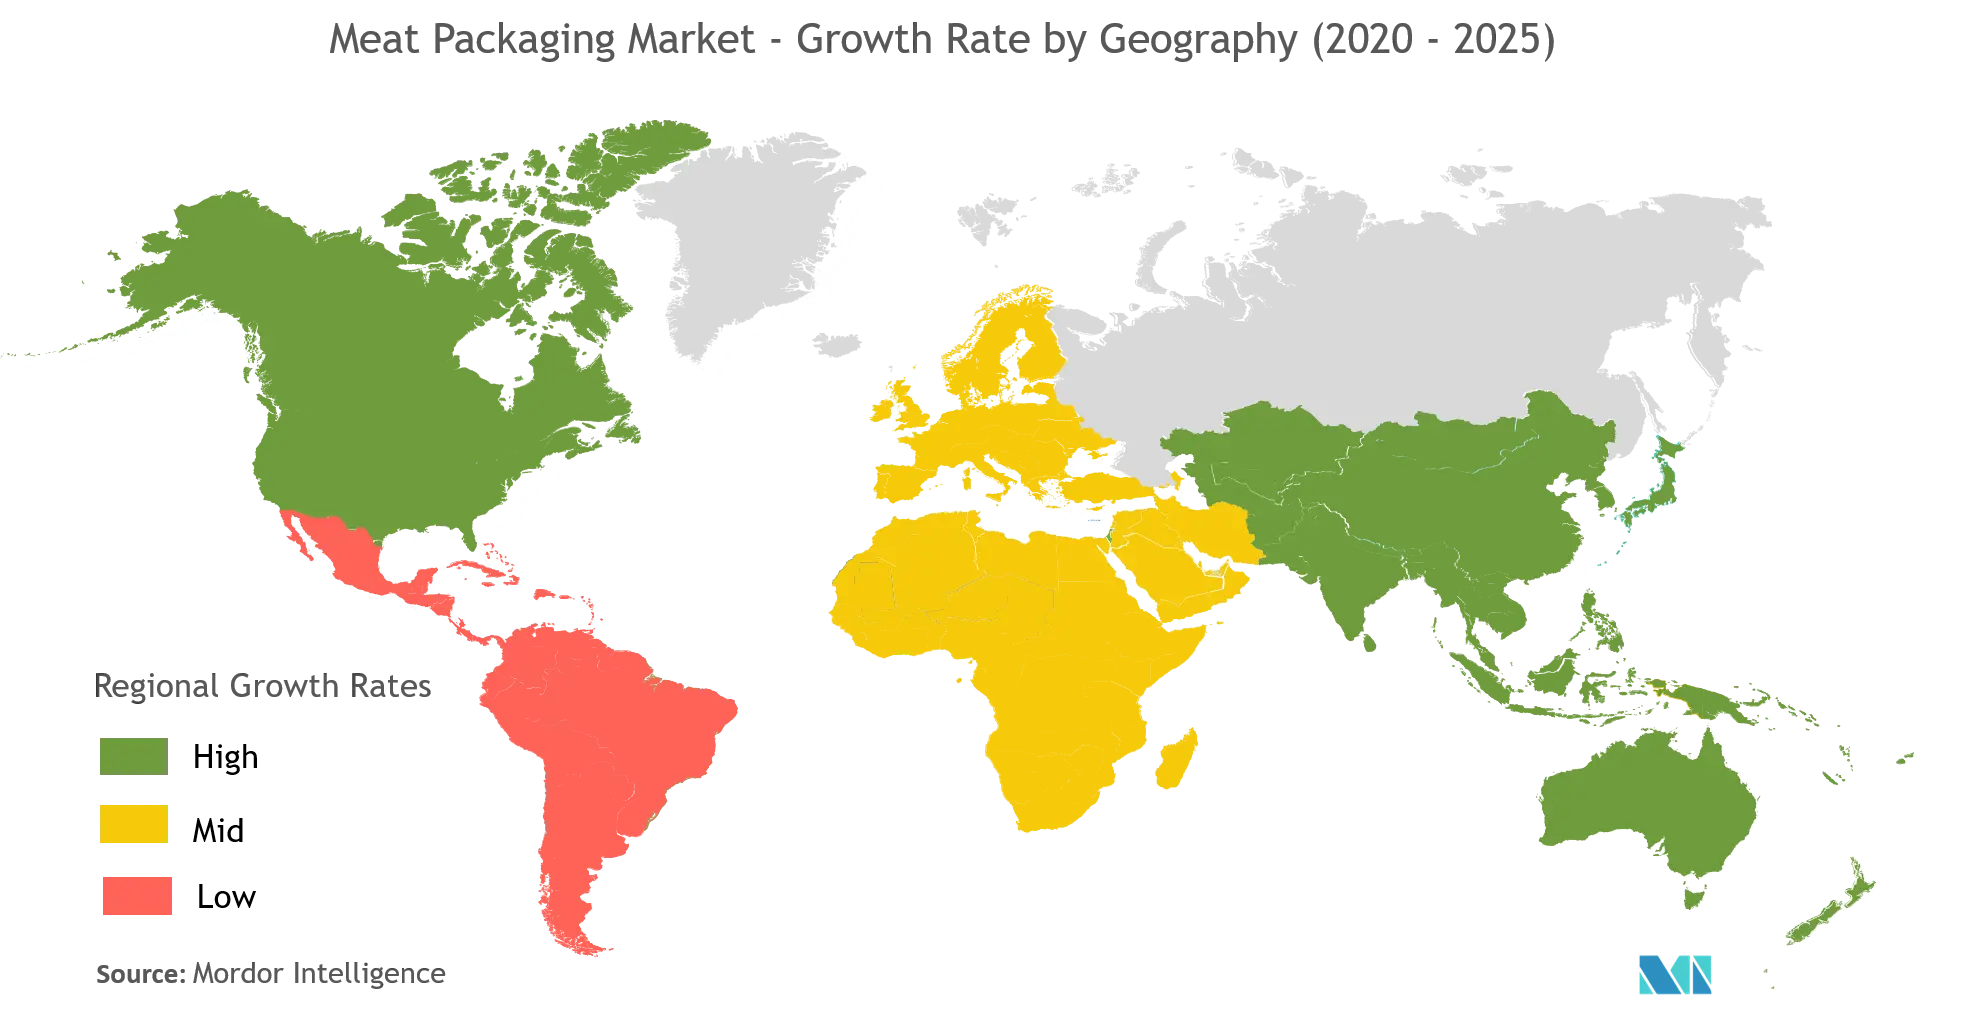 Meat Packaging Market - Growth Rate by Geography (2020 - 2025)